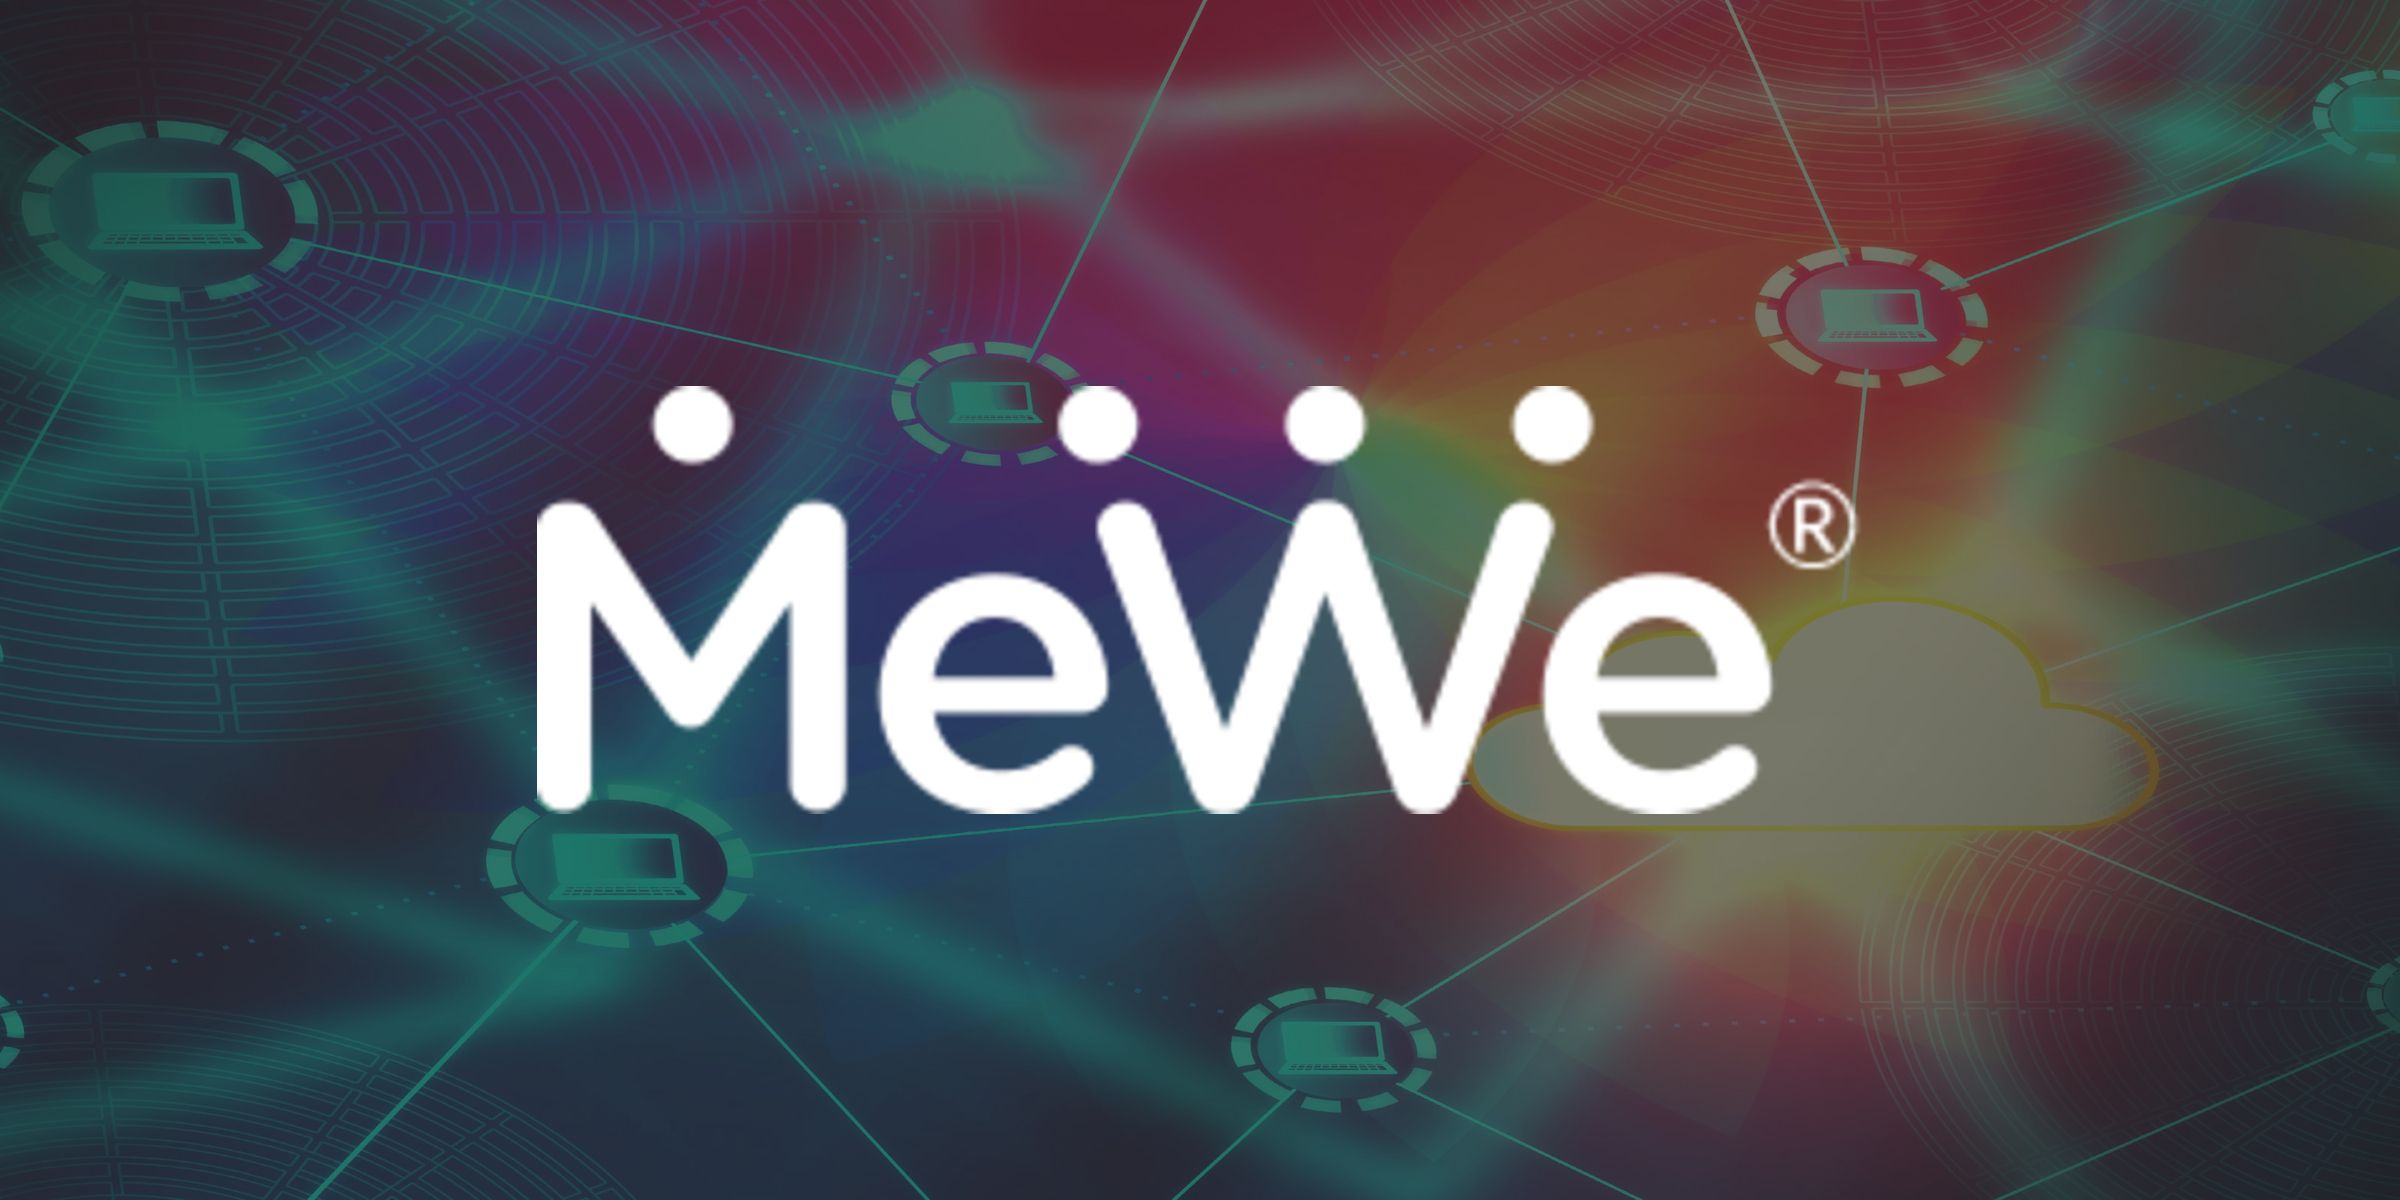 MeWe logo on a multicolored background